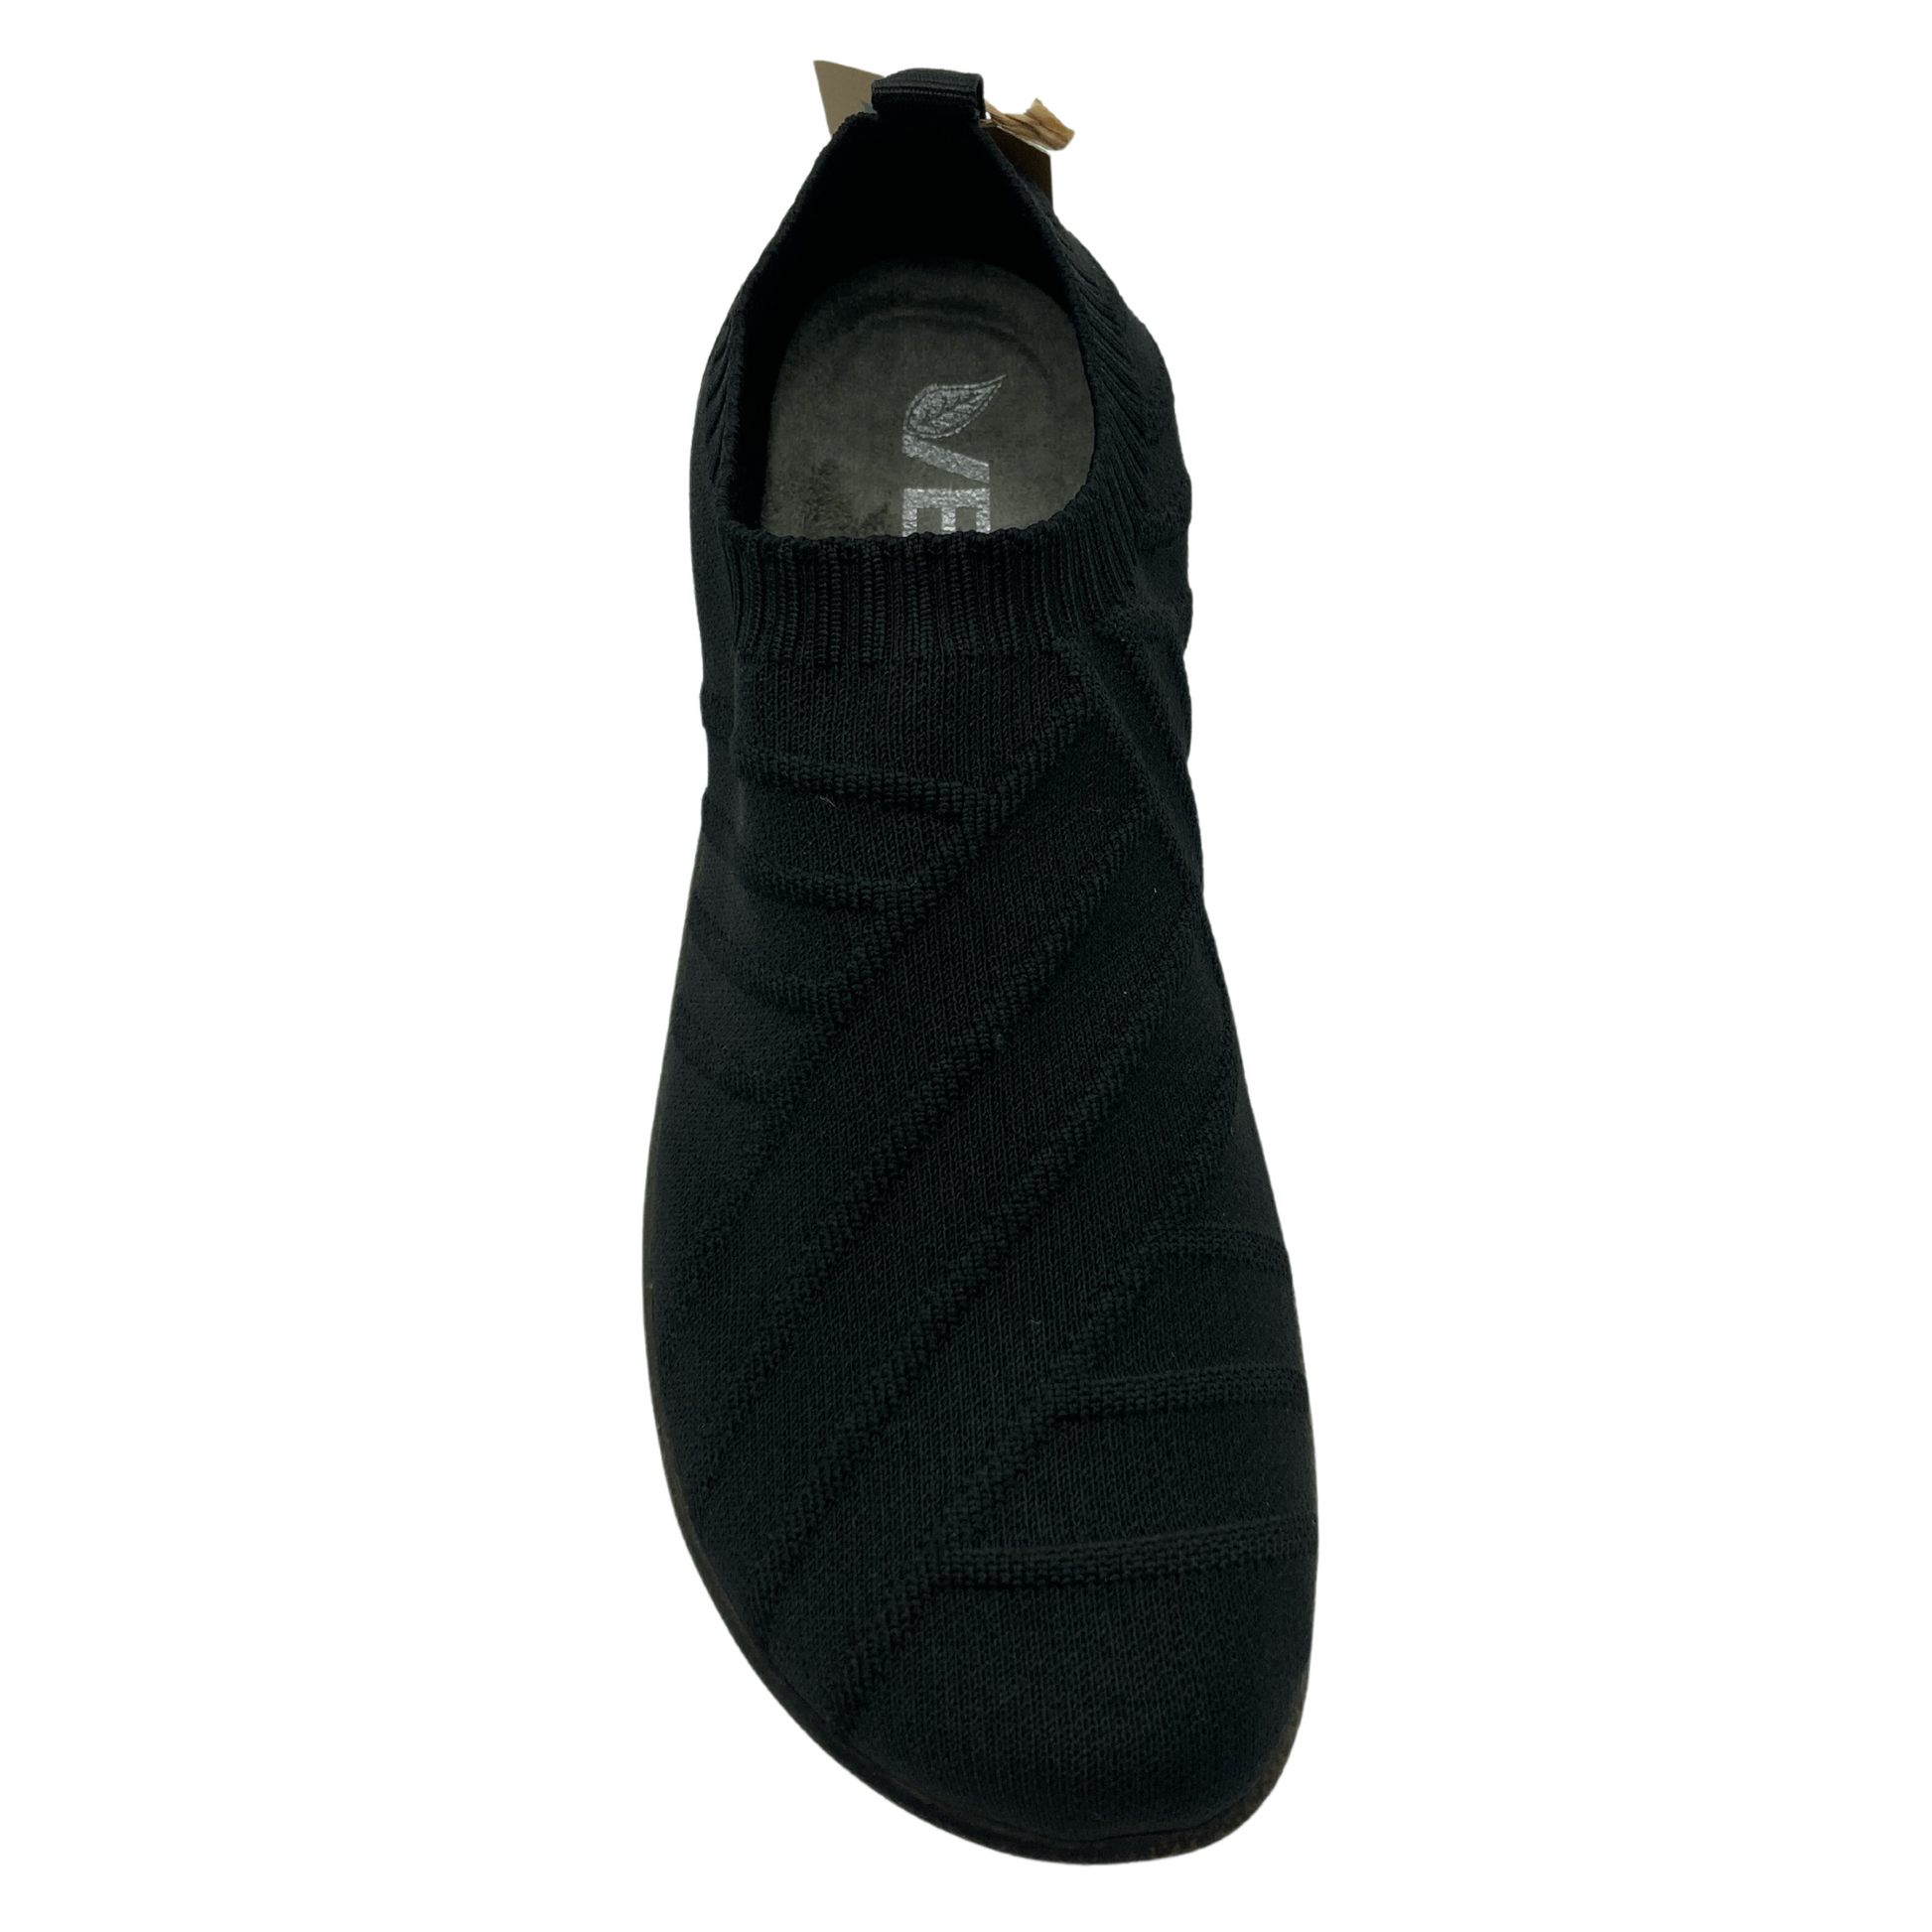 Top view of black knit textured sneaker with natural rounded toe and pull on heel tab